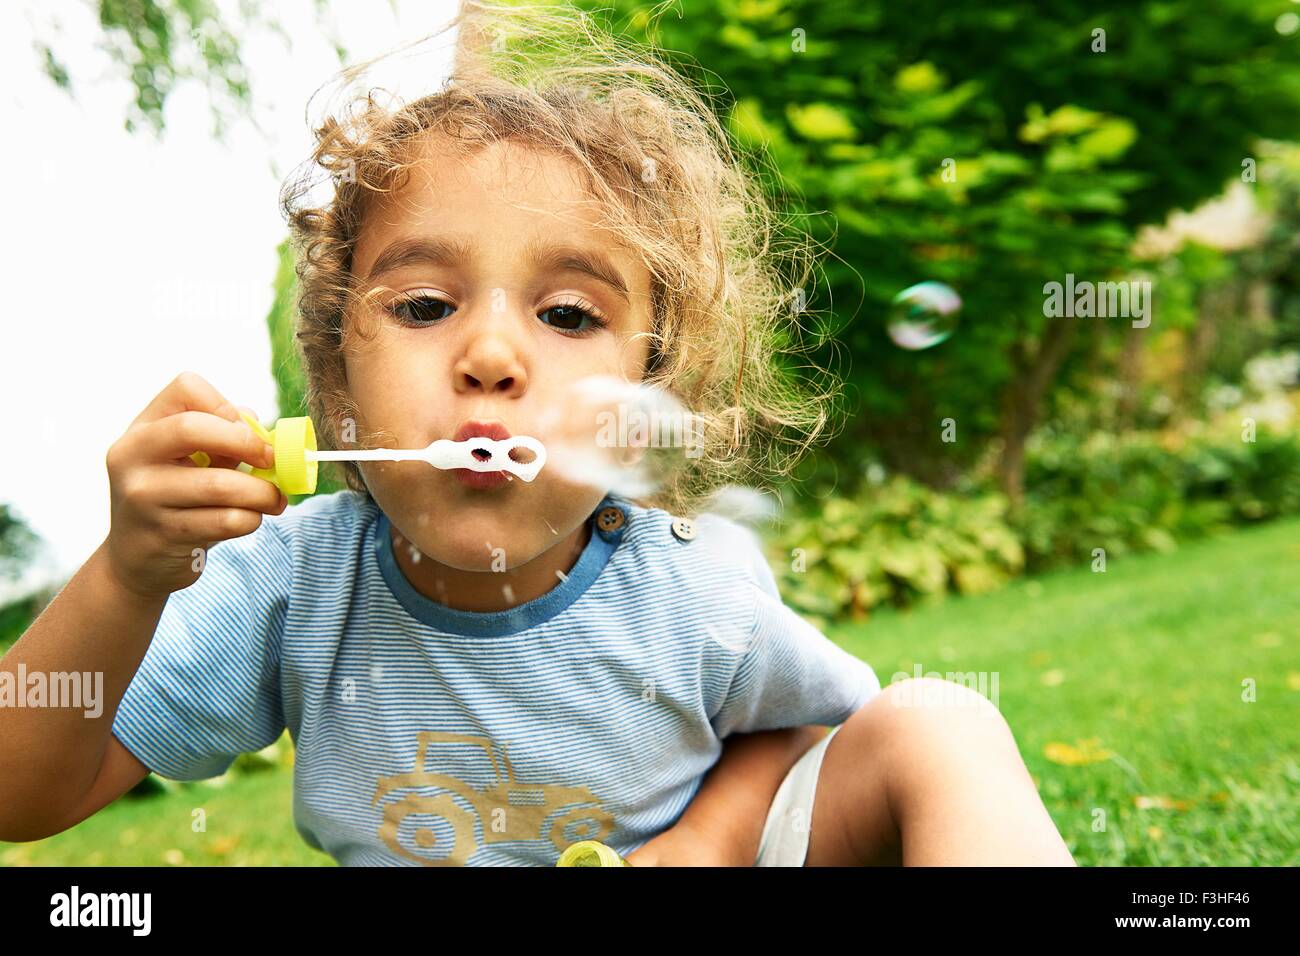 Close up portrait of cute girl blowing bubbles in garden Stock Photo